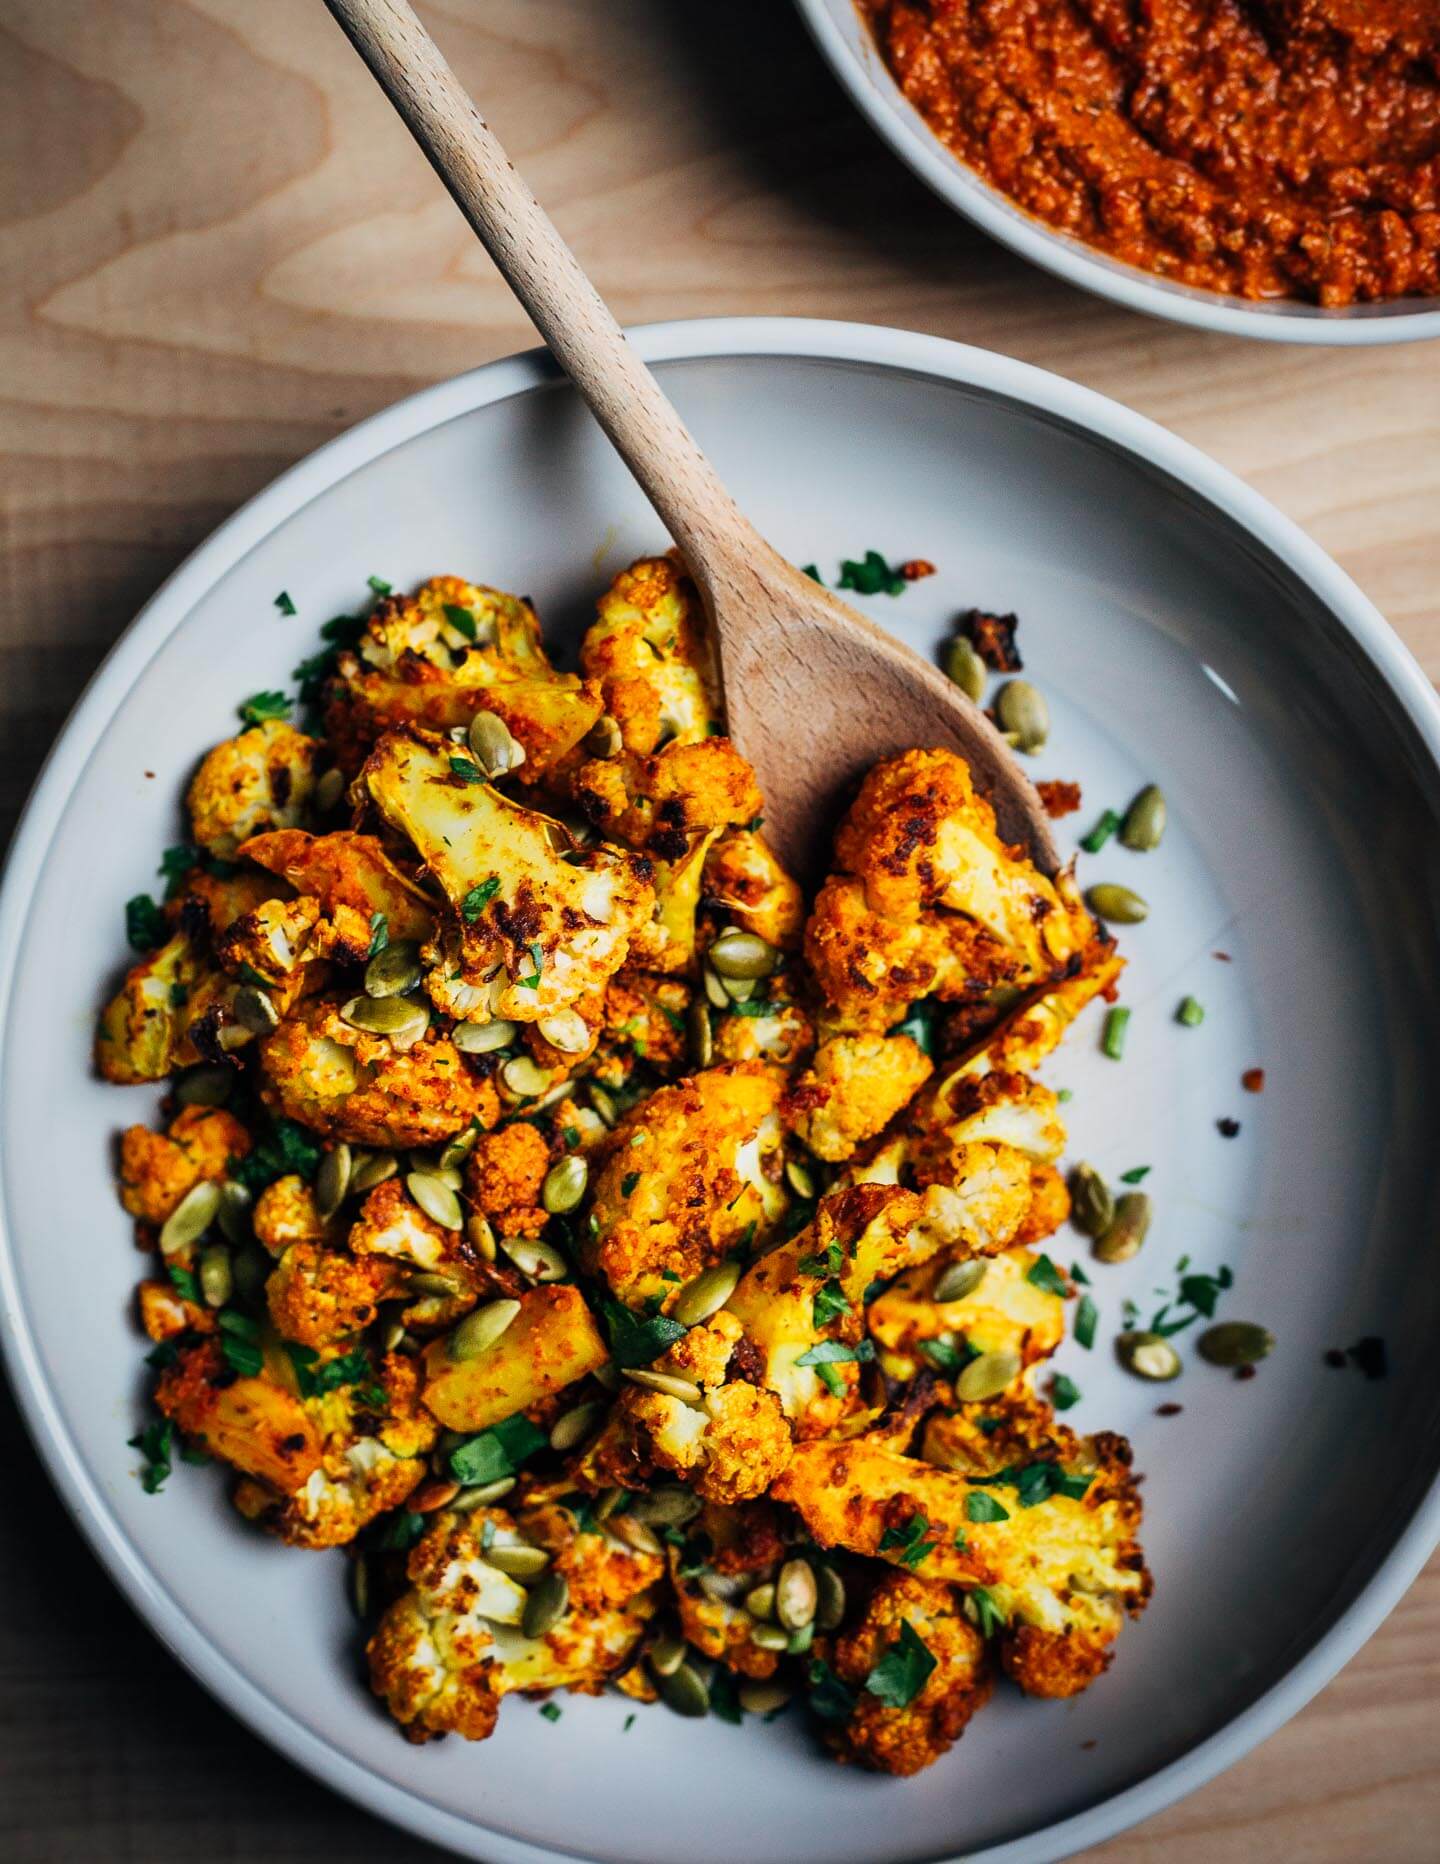 This recipe for romesco-roasted cauliflower coaxes bold, vibrant flavor out of that wintertime staple, roasted cauliflower, along with smoky depth from the romesco sauce and the crunch of salty pepitas.